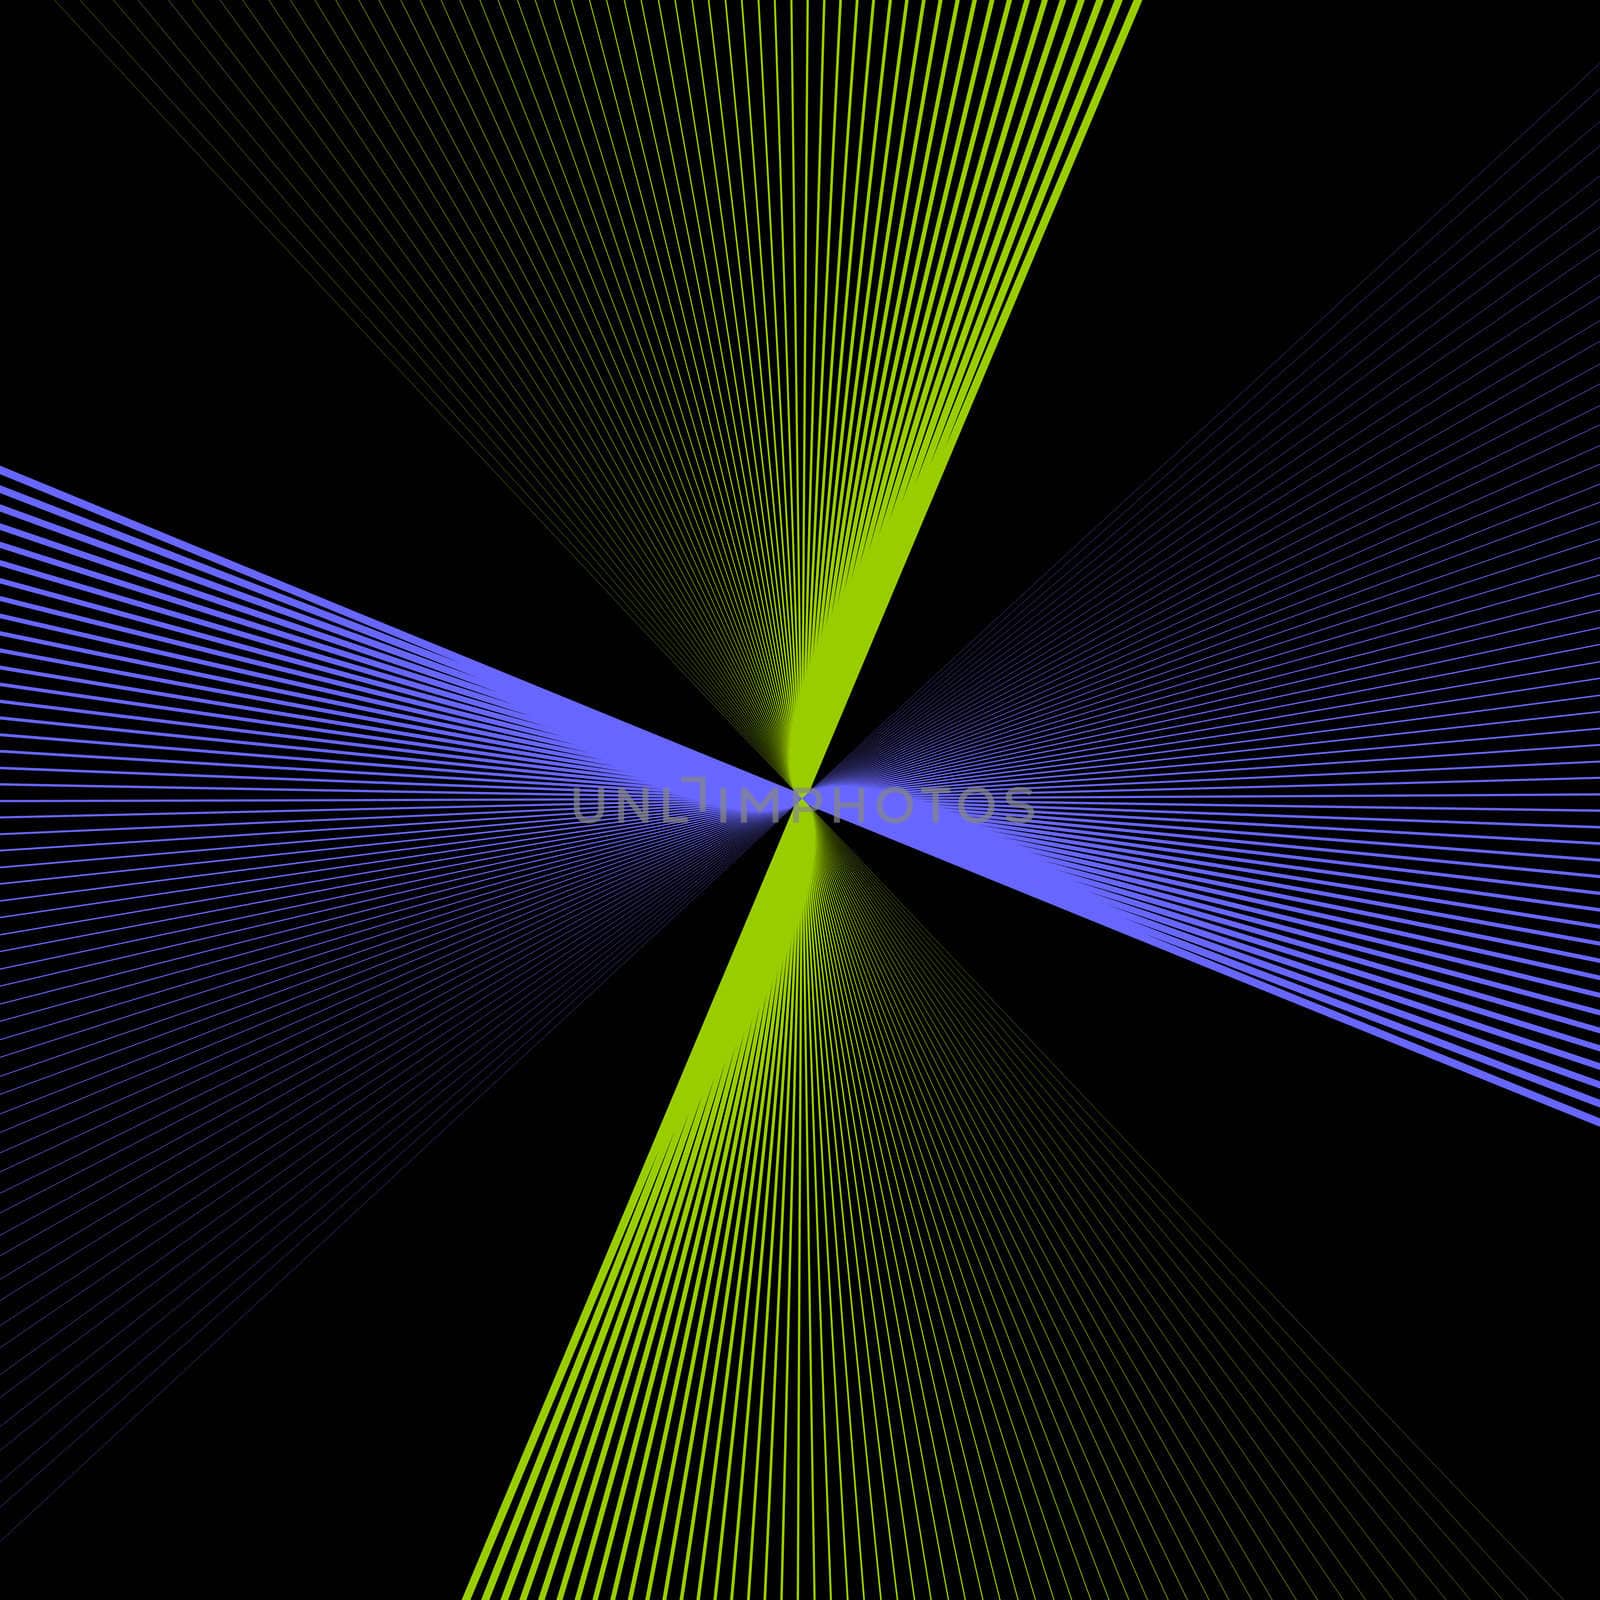 A fractal with rays of blue and green twisting and radiating out from the cetral core in pinwheel fashion.